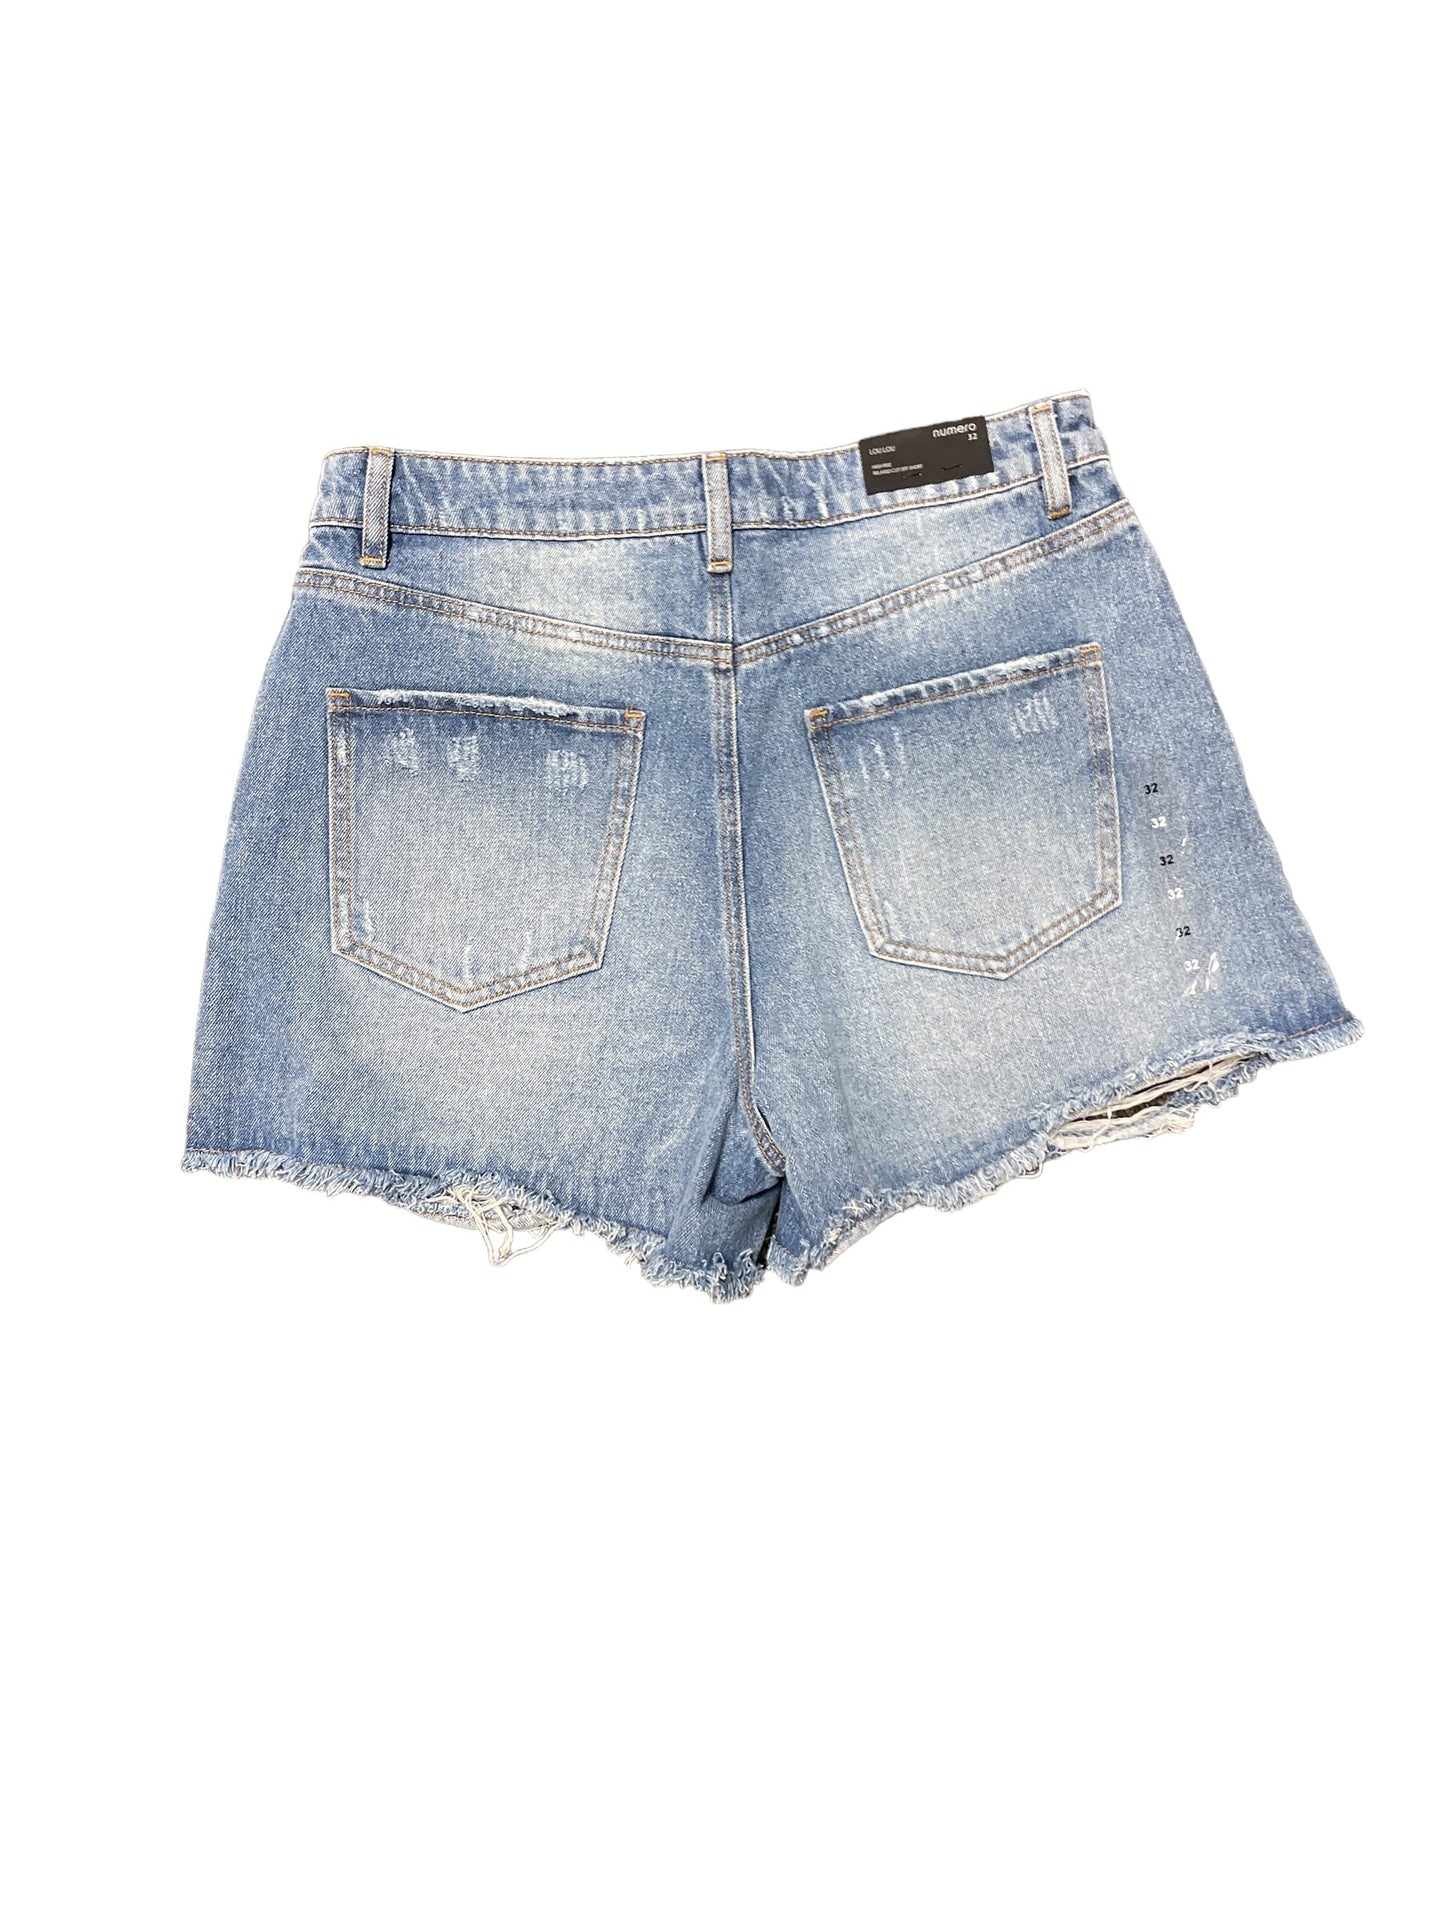 Shorts By Cmc  Size: 14